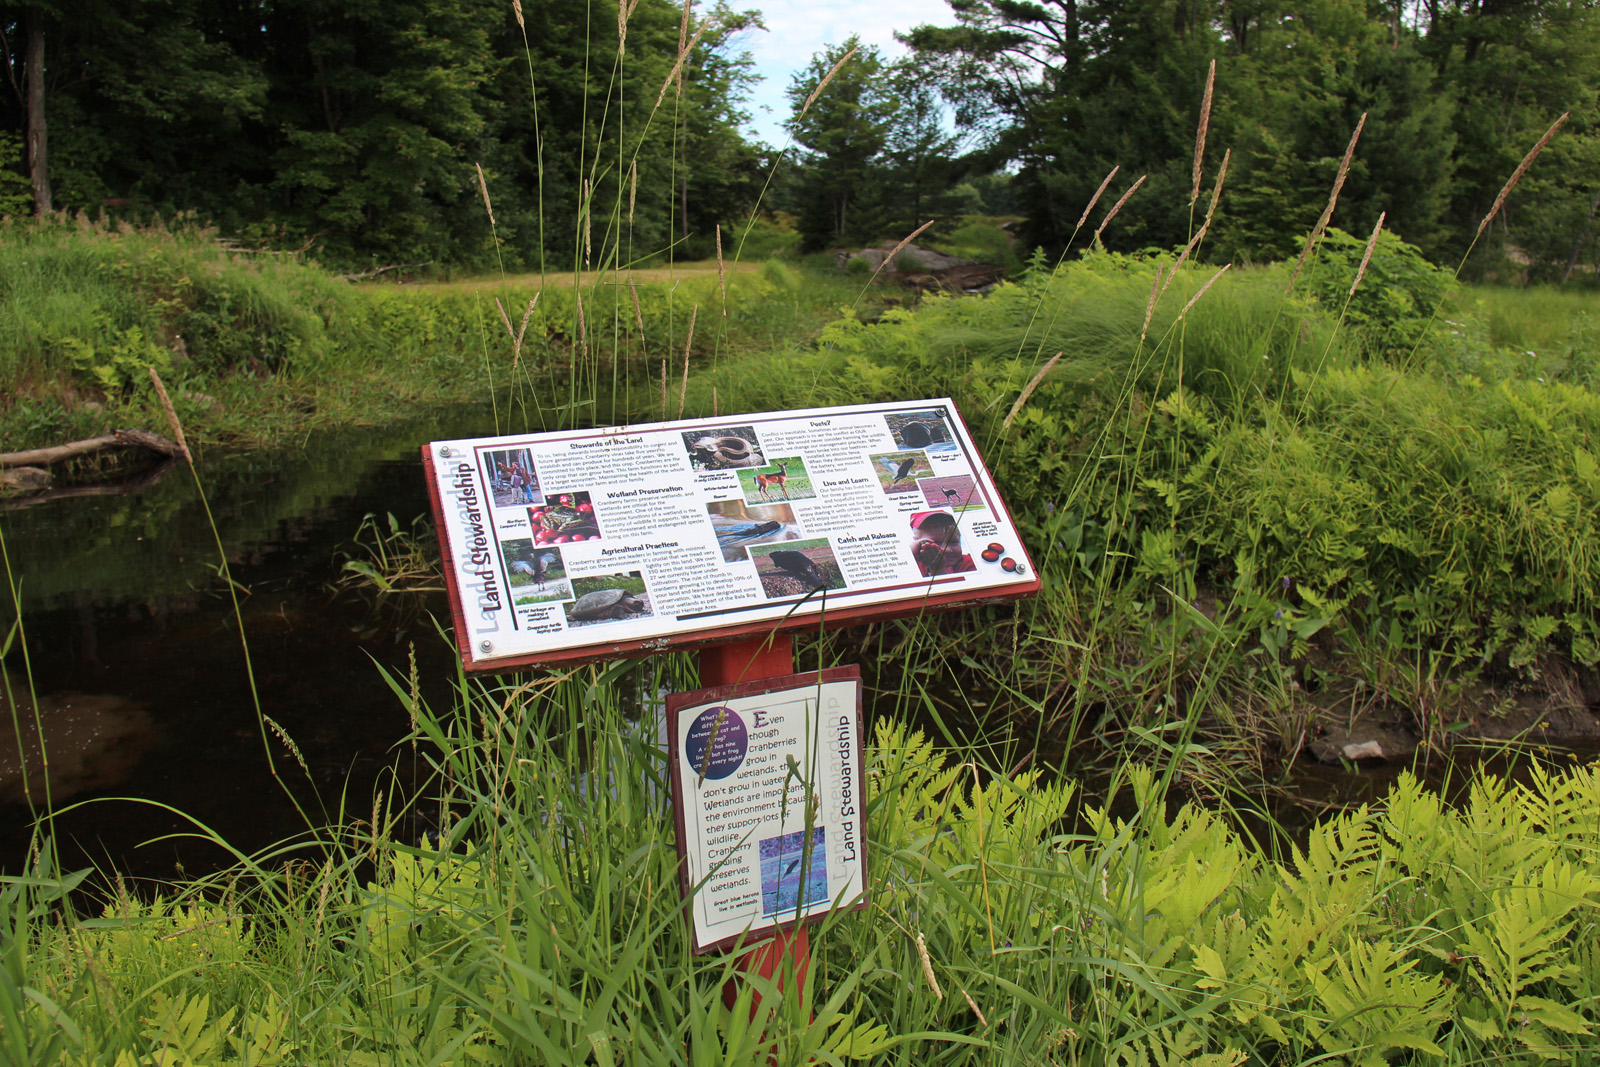 landstewardship trail sign against a background of bullrushes and a stream